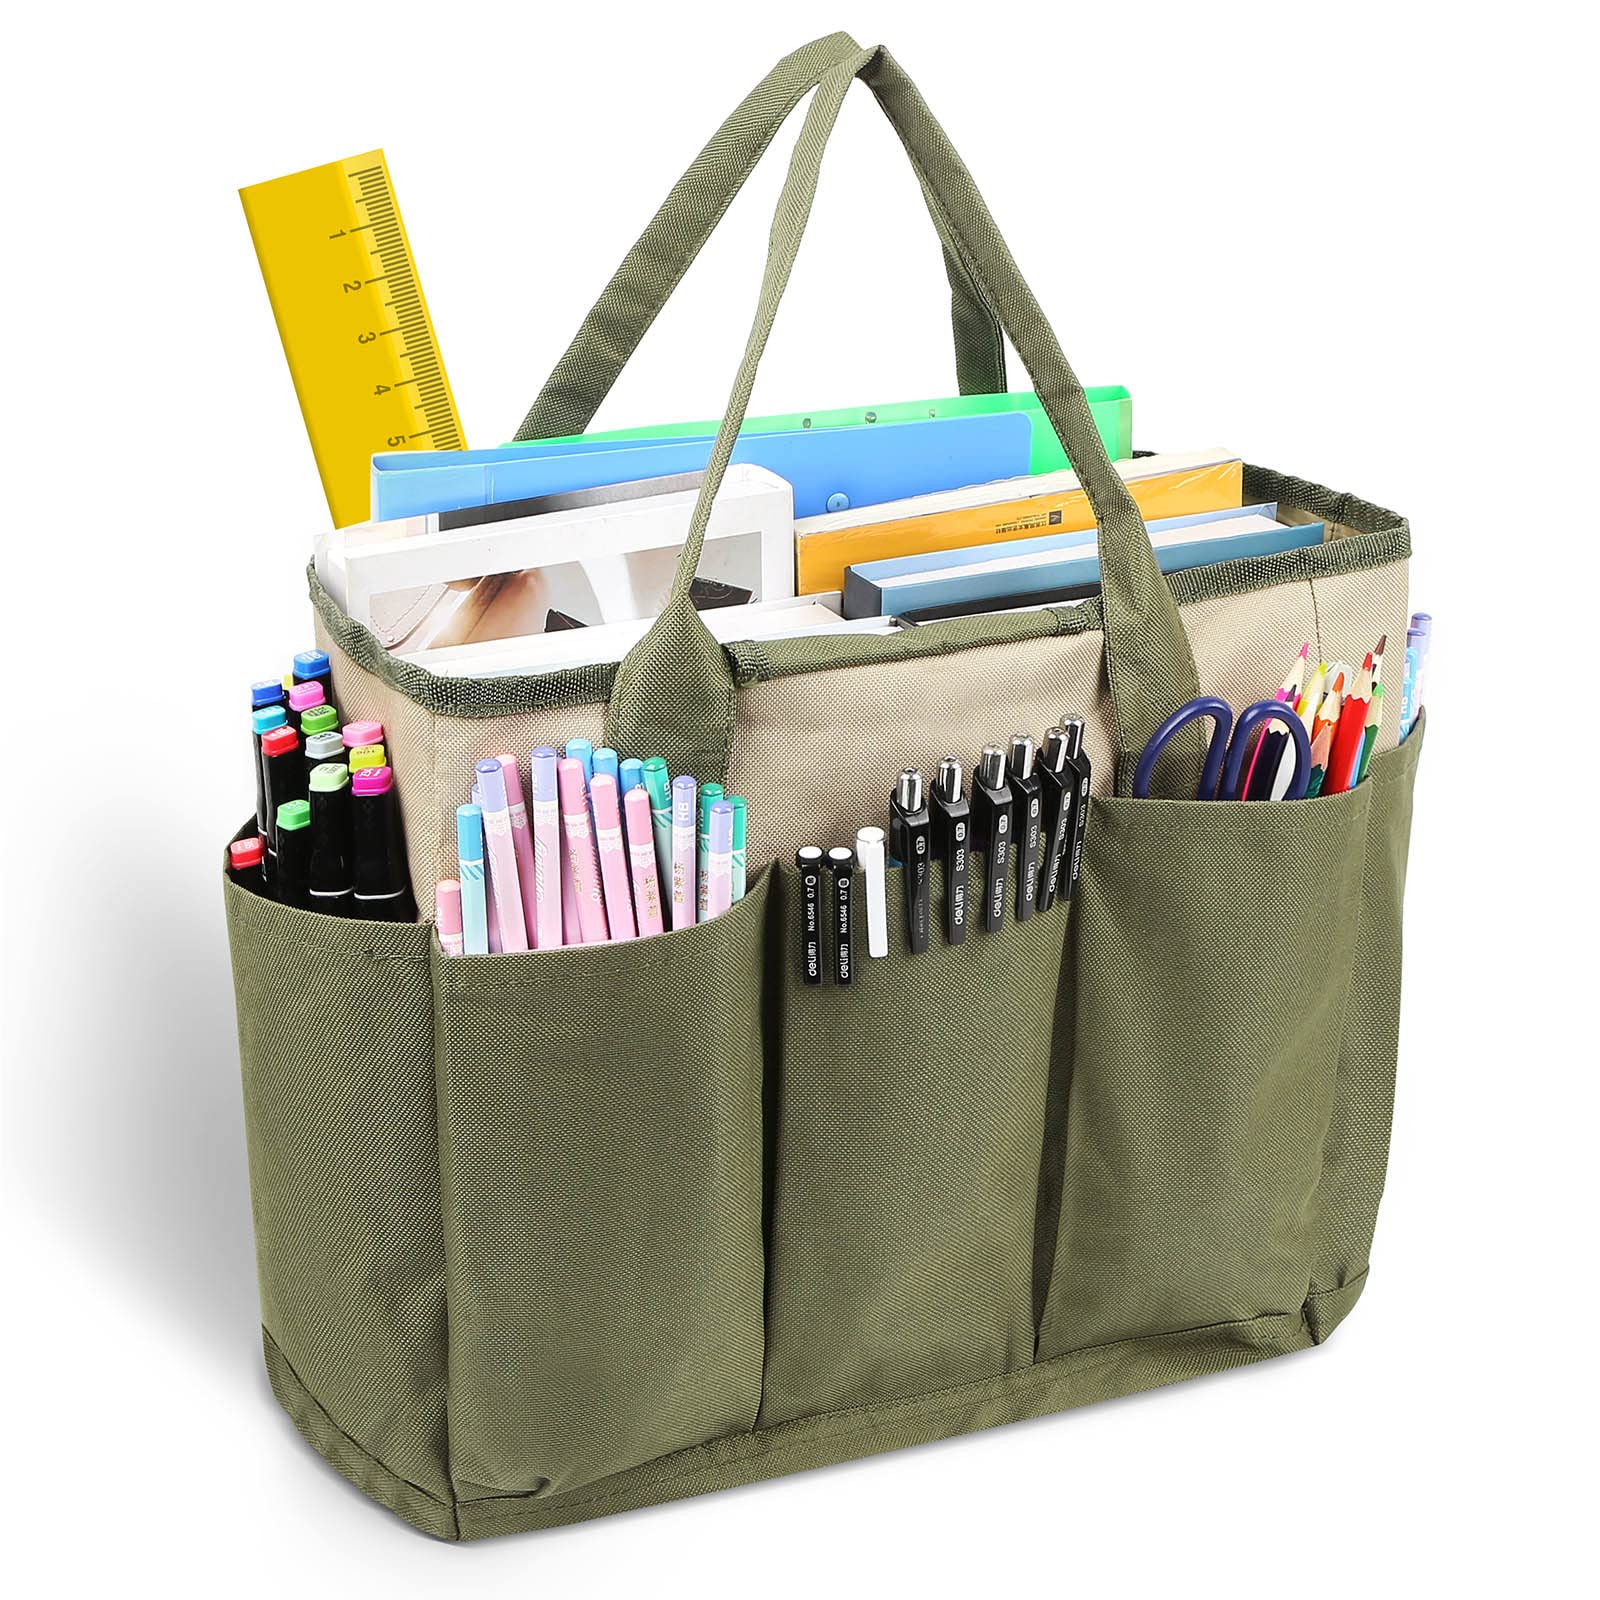 Storage Tote Bag, Classroom Supplies For Teacher, Stationery And Teaching  Aid Organization For Arts Tools, Books, Pencils, Etc, And Office Desktop  Organize, Make-up Tote With Handles For Travel, Organizer Supplies, Teaches  Classroom